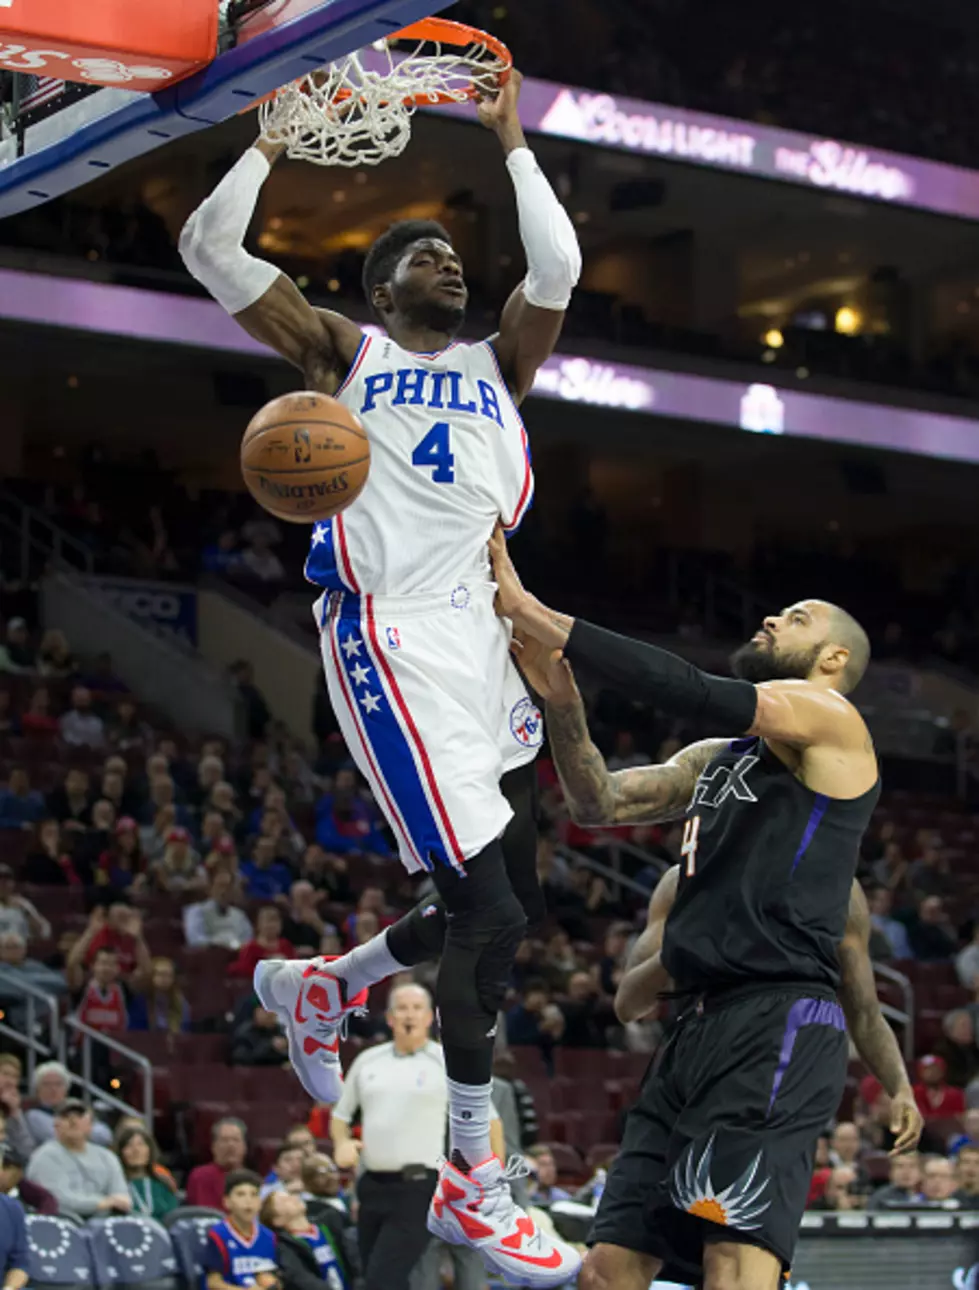 Watch: Nerlens Noel With a Ridiculous Reverse Jam